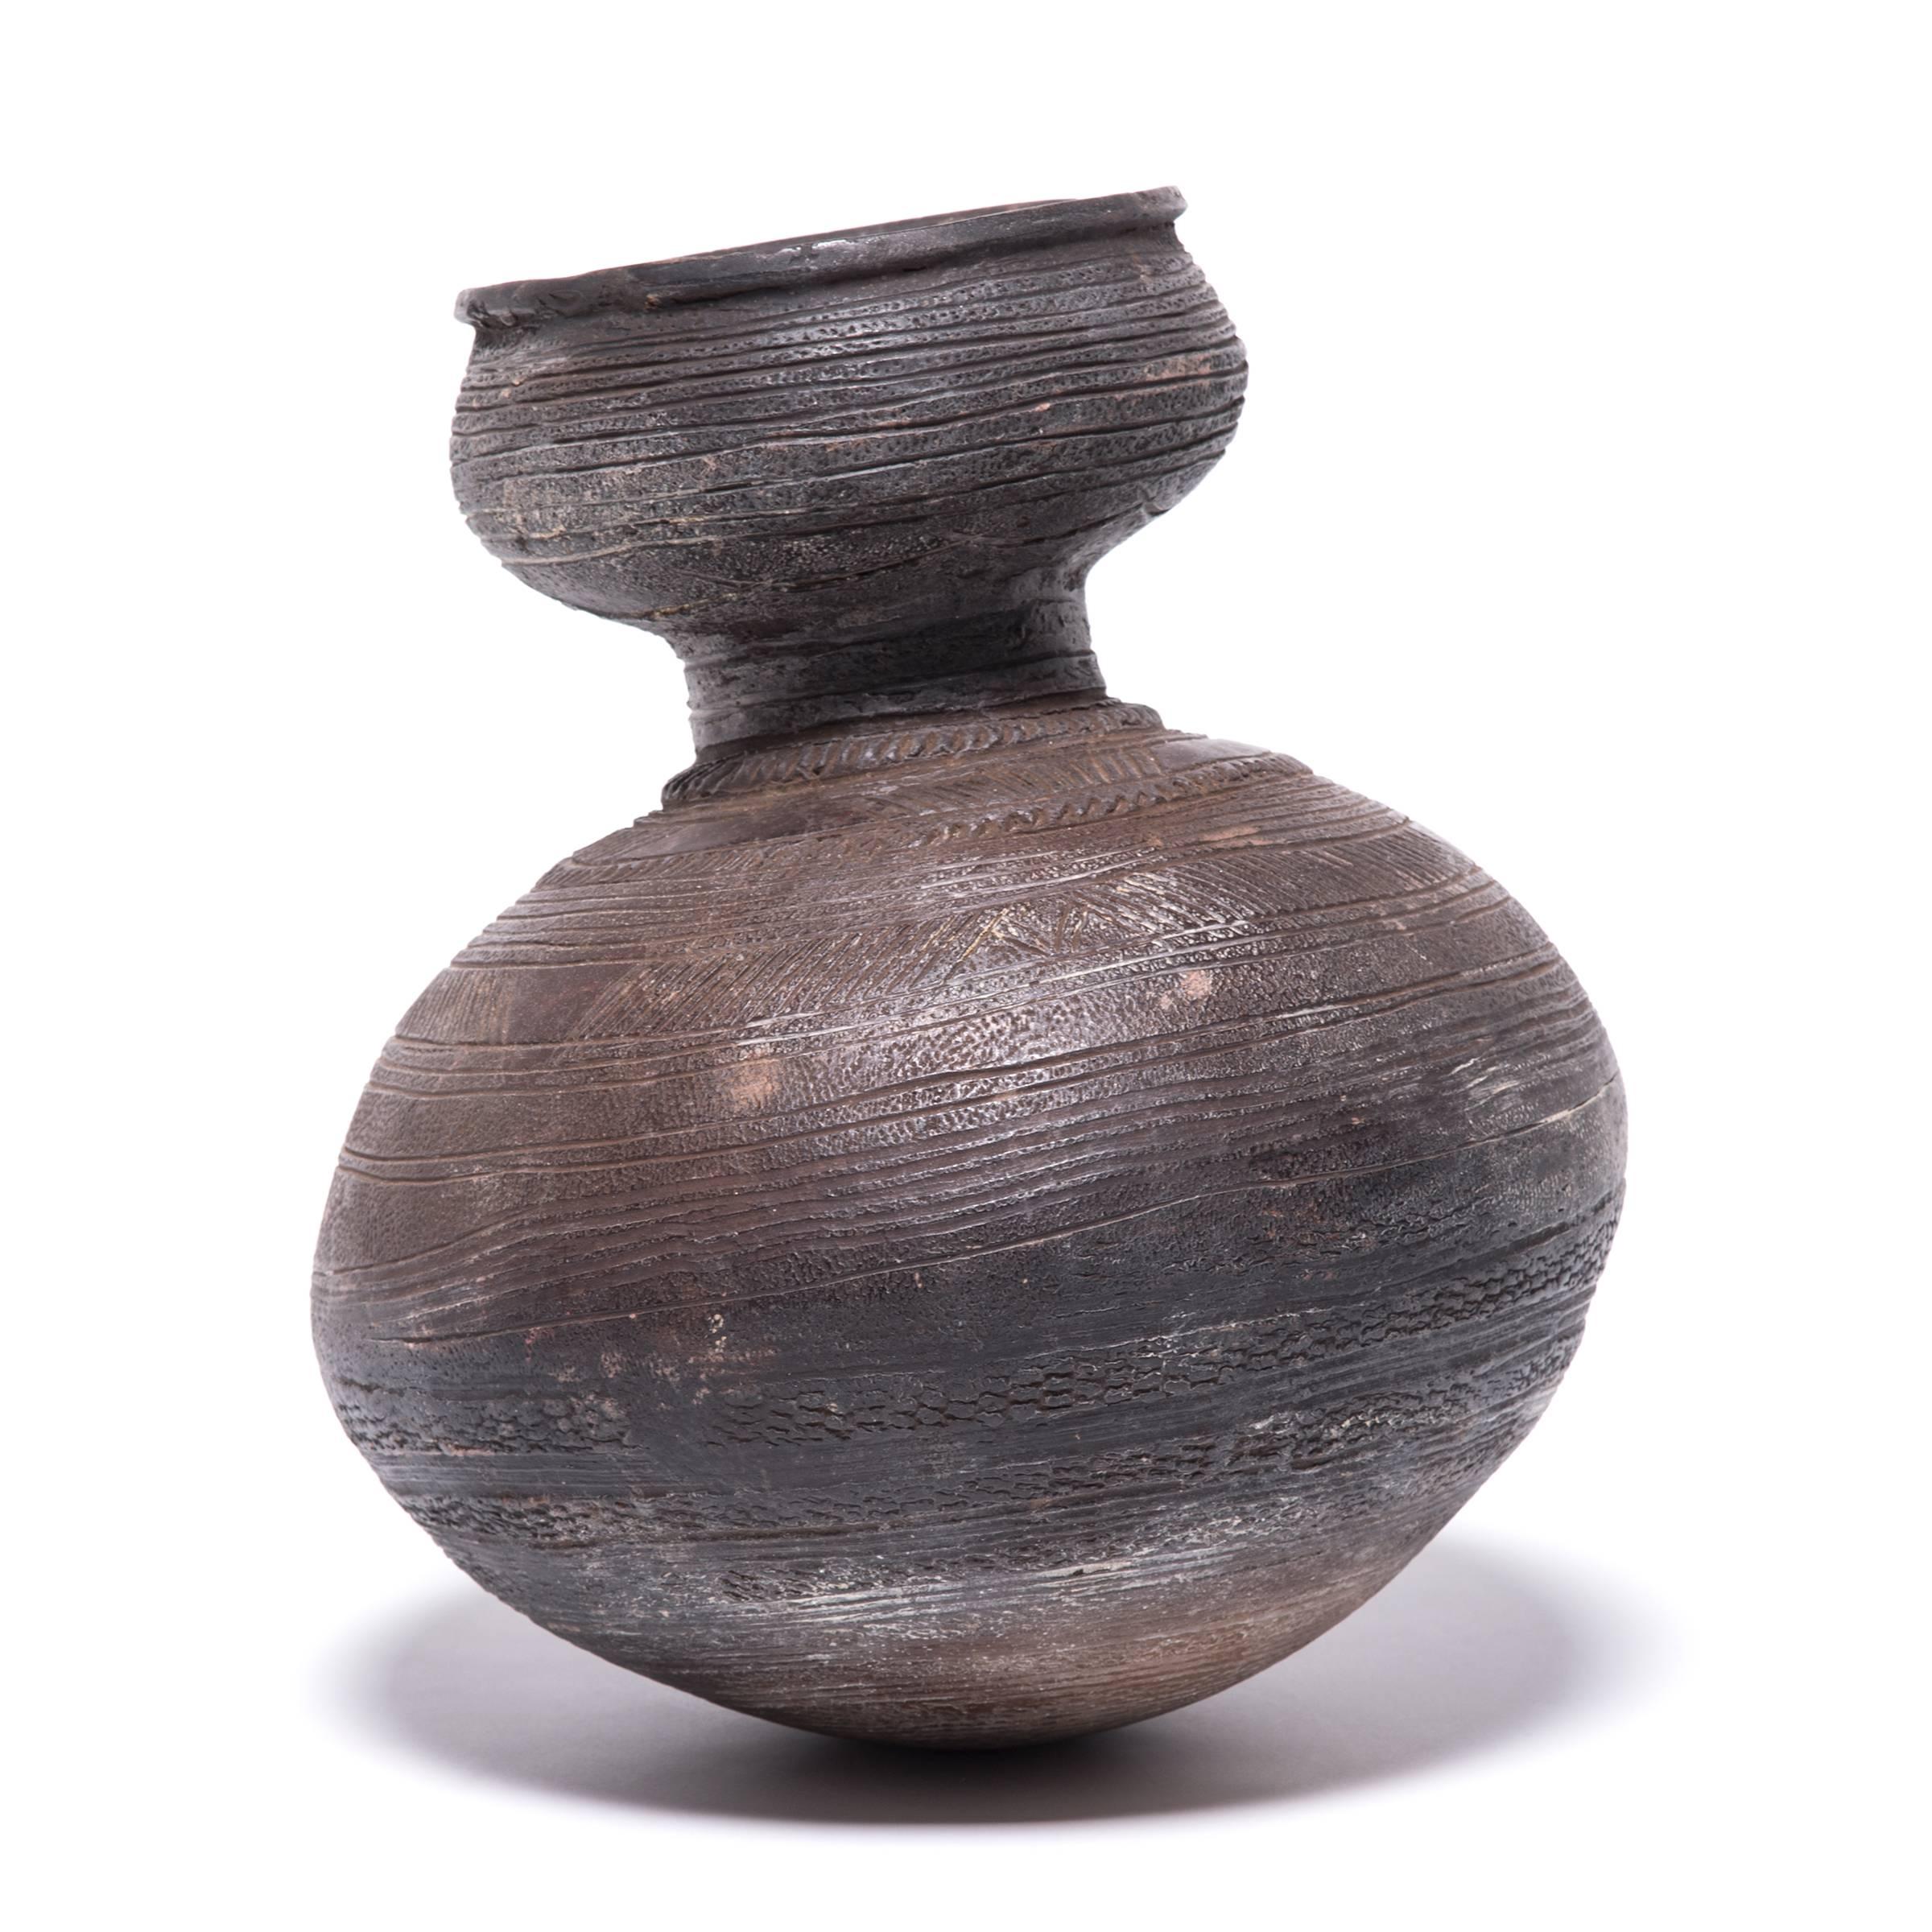 Inspired by the natural world, nupe ceramicists fired this water vessel in the shape of a gourd. The vessel's varied textures and colors come from its utilitarian design. The parallel banding and arched motifs create a handworn texture that